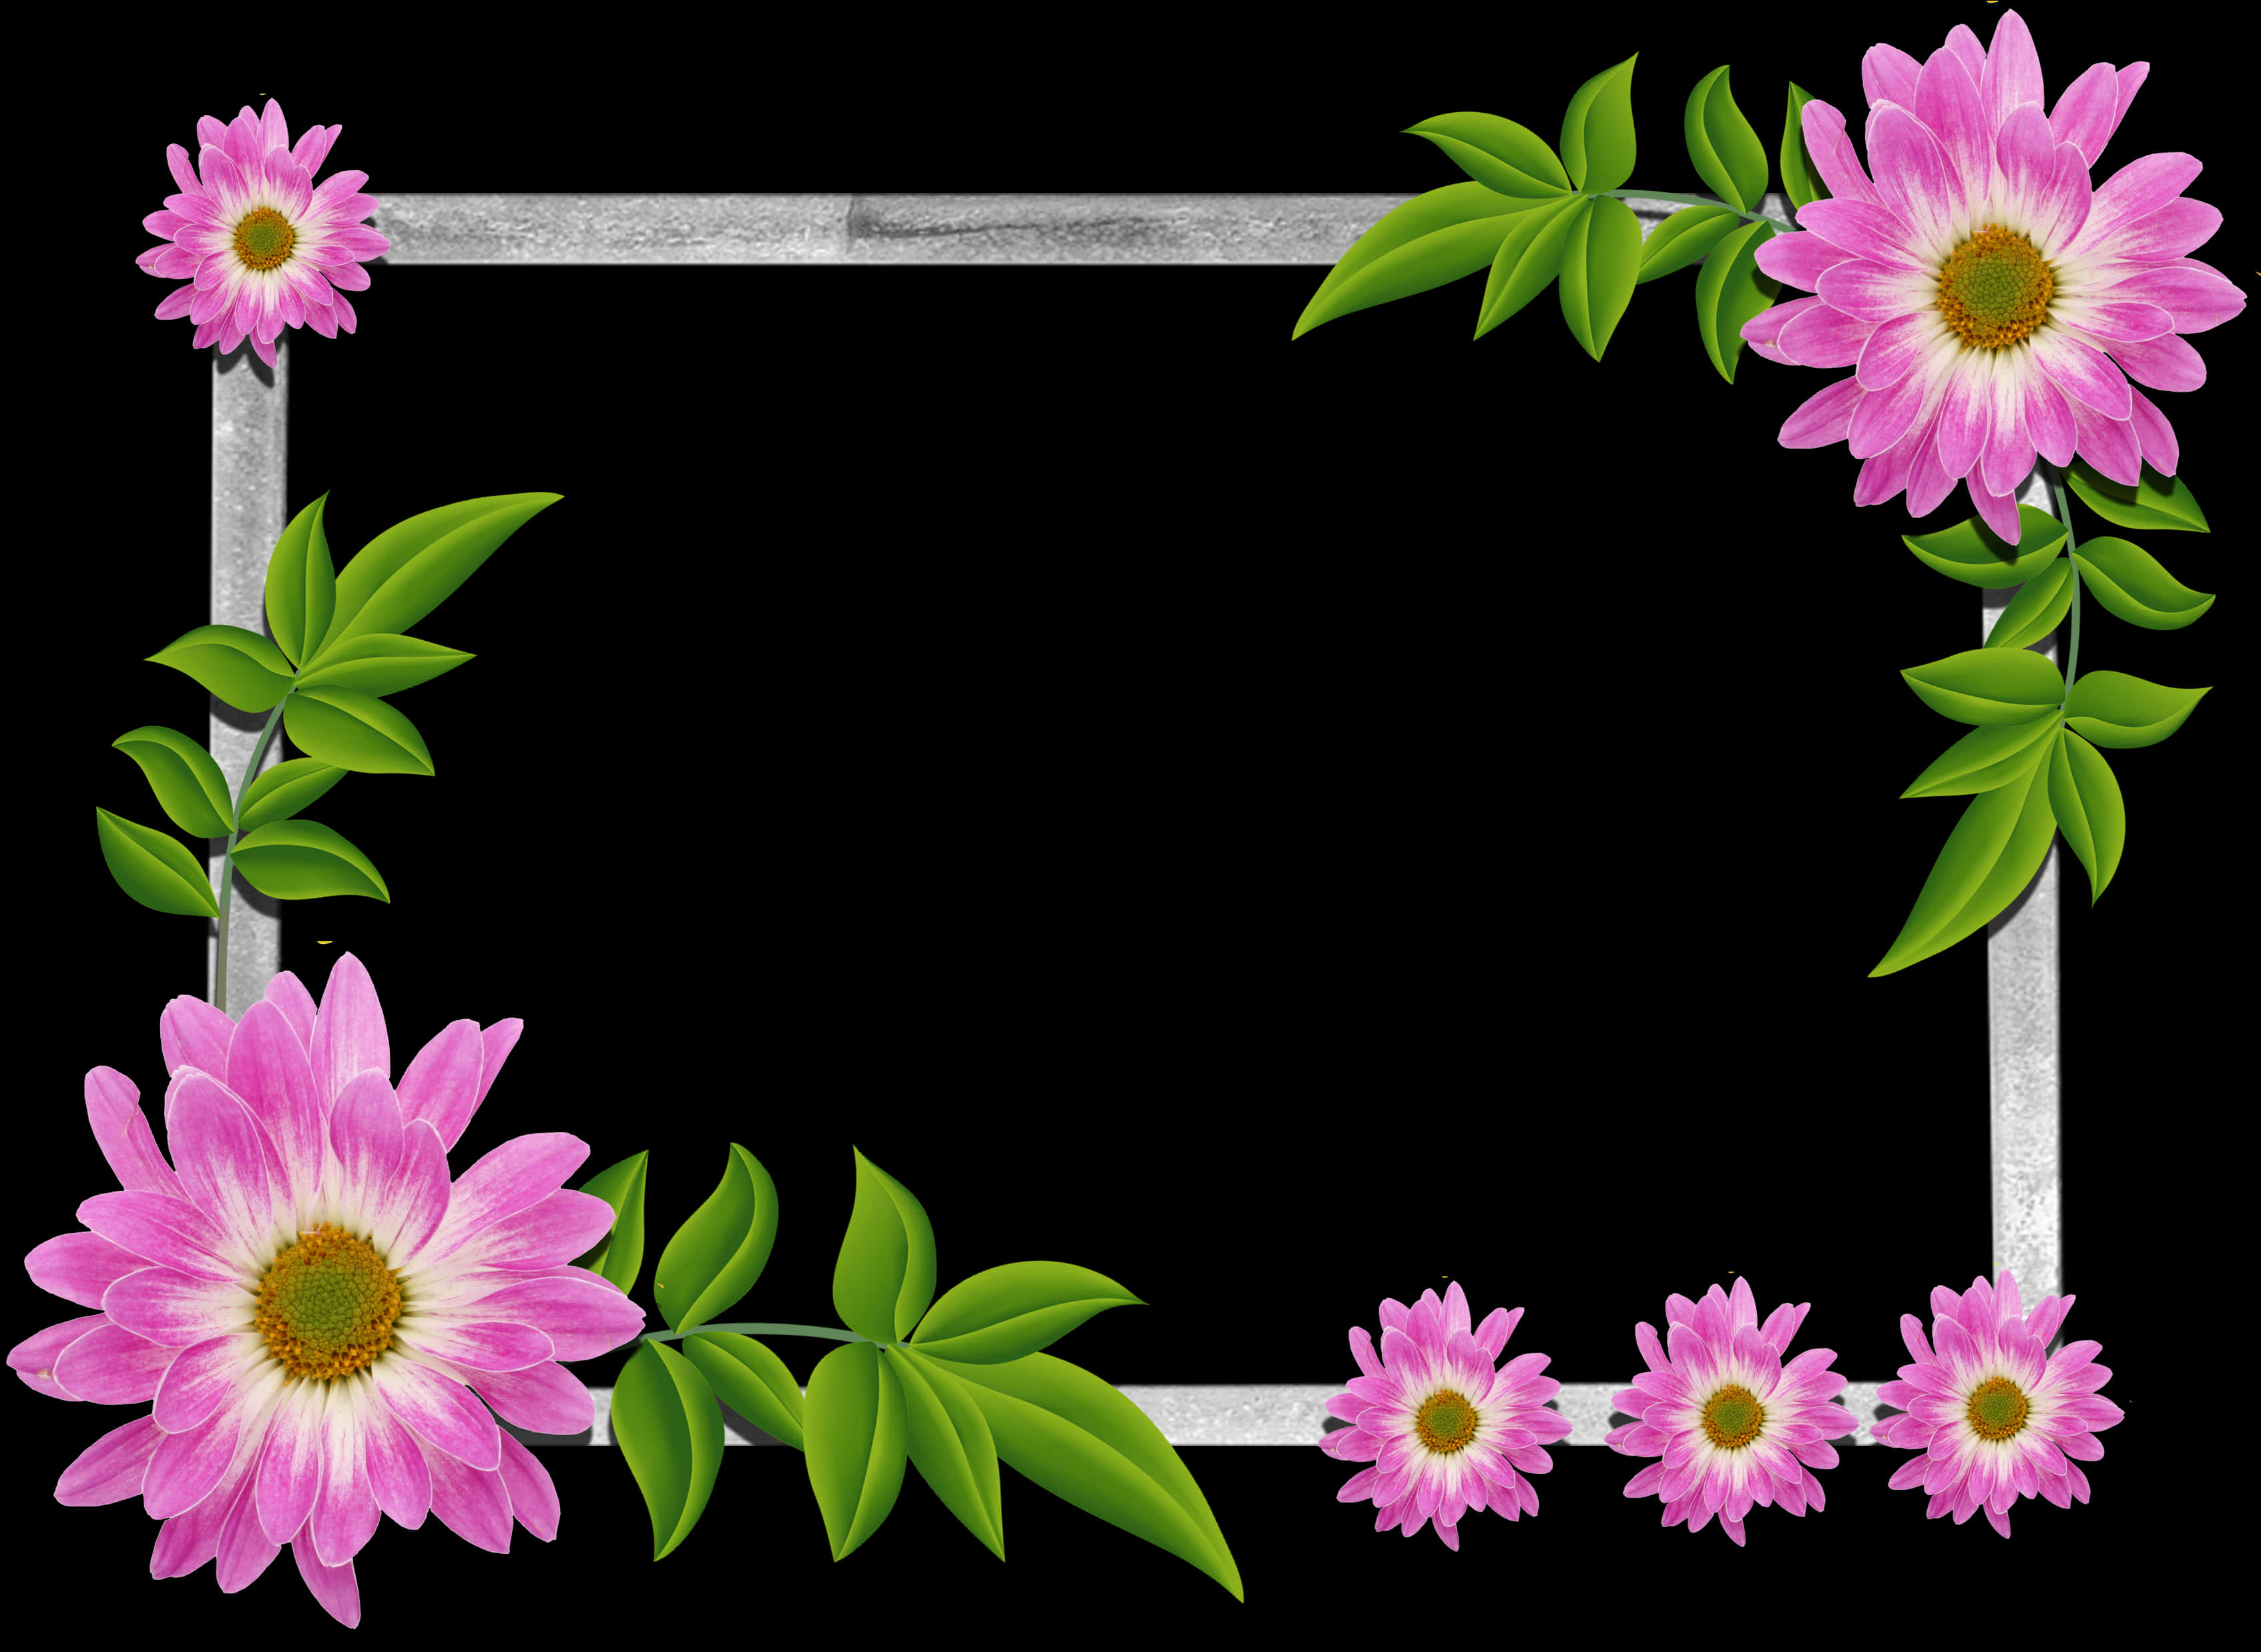 A Frame Of Flowers And Leaves